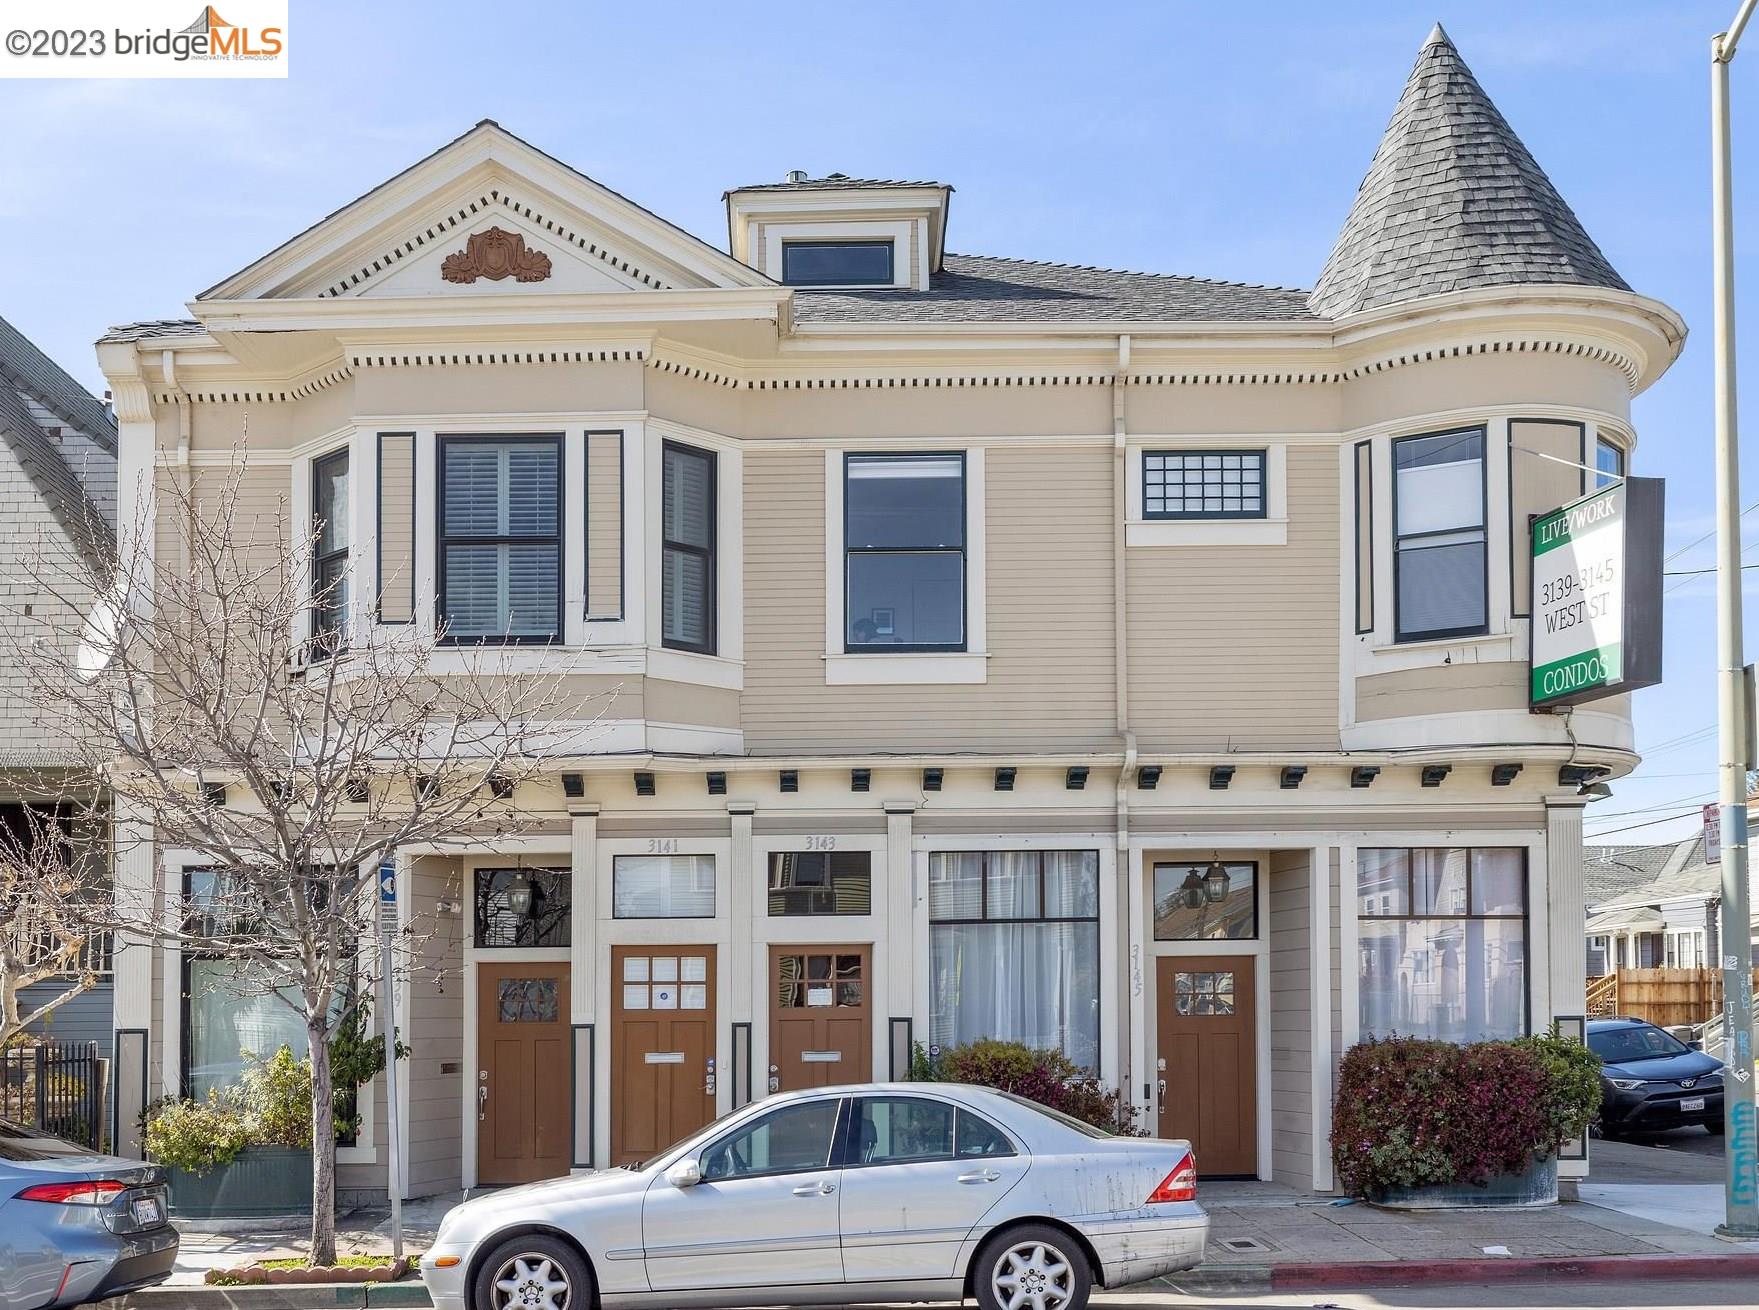 Come see this beautiful 1910 Victorian-style condo, located in the Hoover-Foster Area of West Oakland.  This modern & updated unit has a skylight that allows natural light to flow throughout. Hardwood floors, in-unit laundry, ample built-in storage, and the attic has the potential to develop into an additional room.  The kitchen boasts a suite of stainless steel appliances, and soft-closing cabinets.  Enjoy the semi-private back deck that adds outdoor living for entertaining.  Gated off-street parking comes with this unit as well.  With a Walk Score of 84, a Bike Score of 100 & a Transit Score of 70, the home is conveniently located to all that your heart desires.  This property qualifies for First Republic Bank's Eagle Community Loan at 4.80% interest (subject to change).  Open House Saturday, March 18th, 1:00 to 3:30 pm.